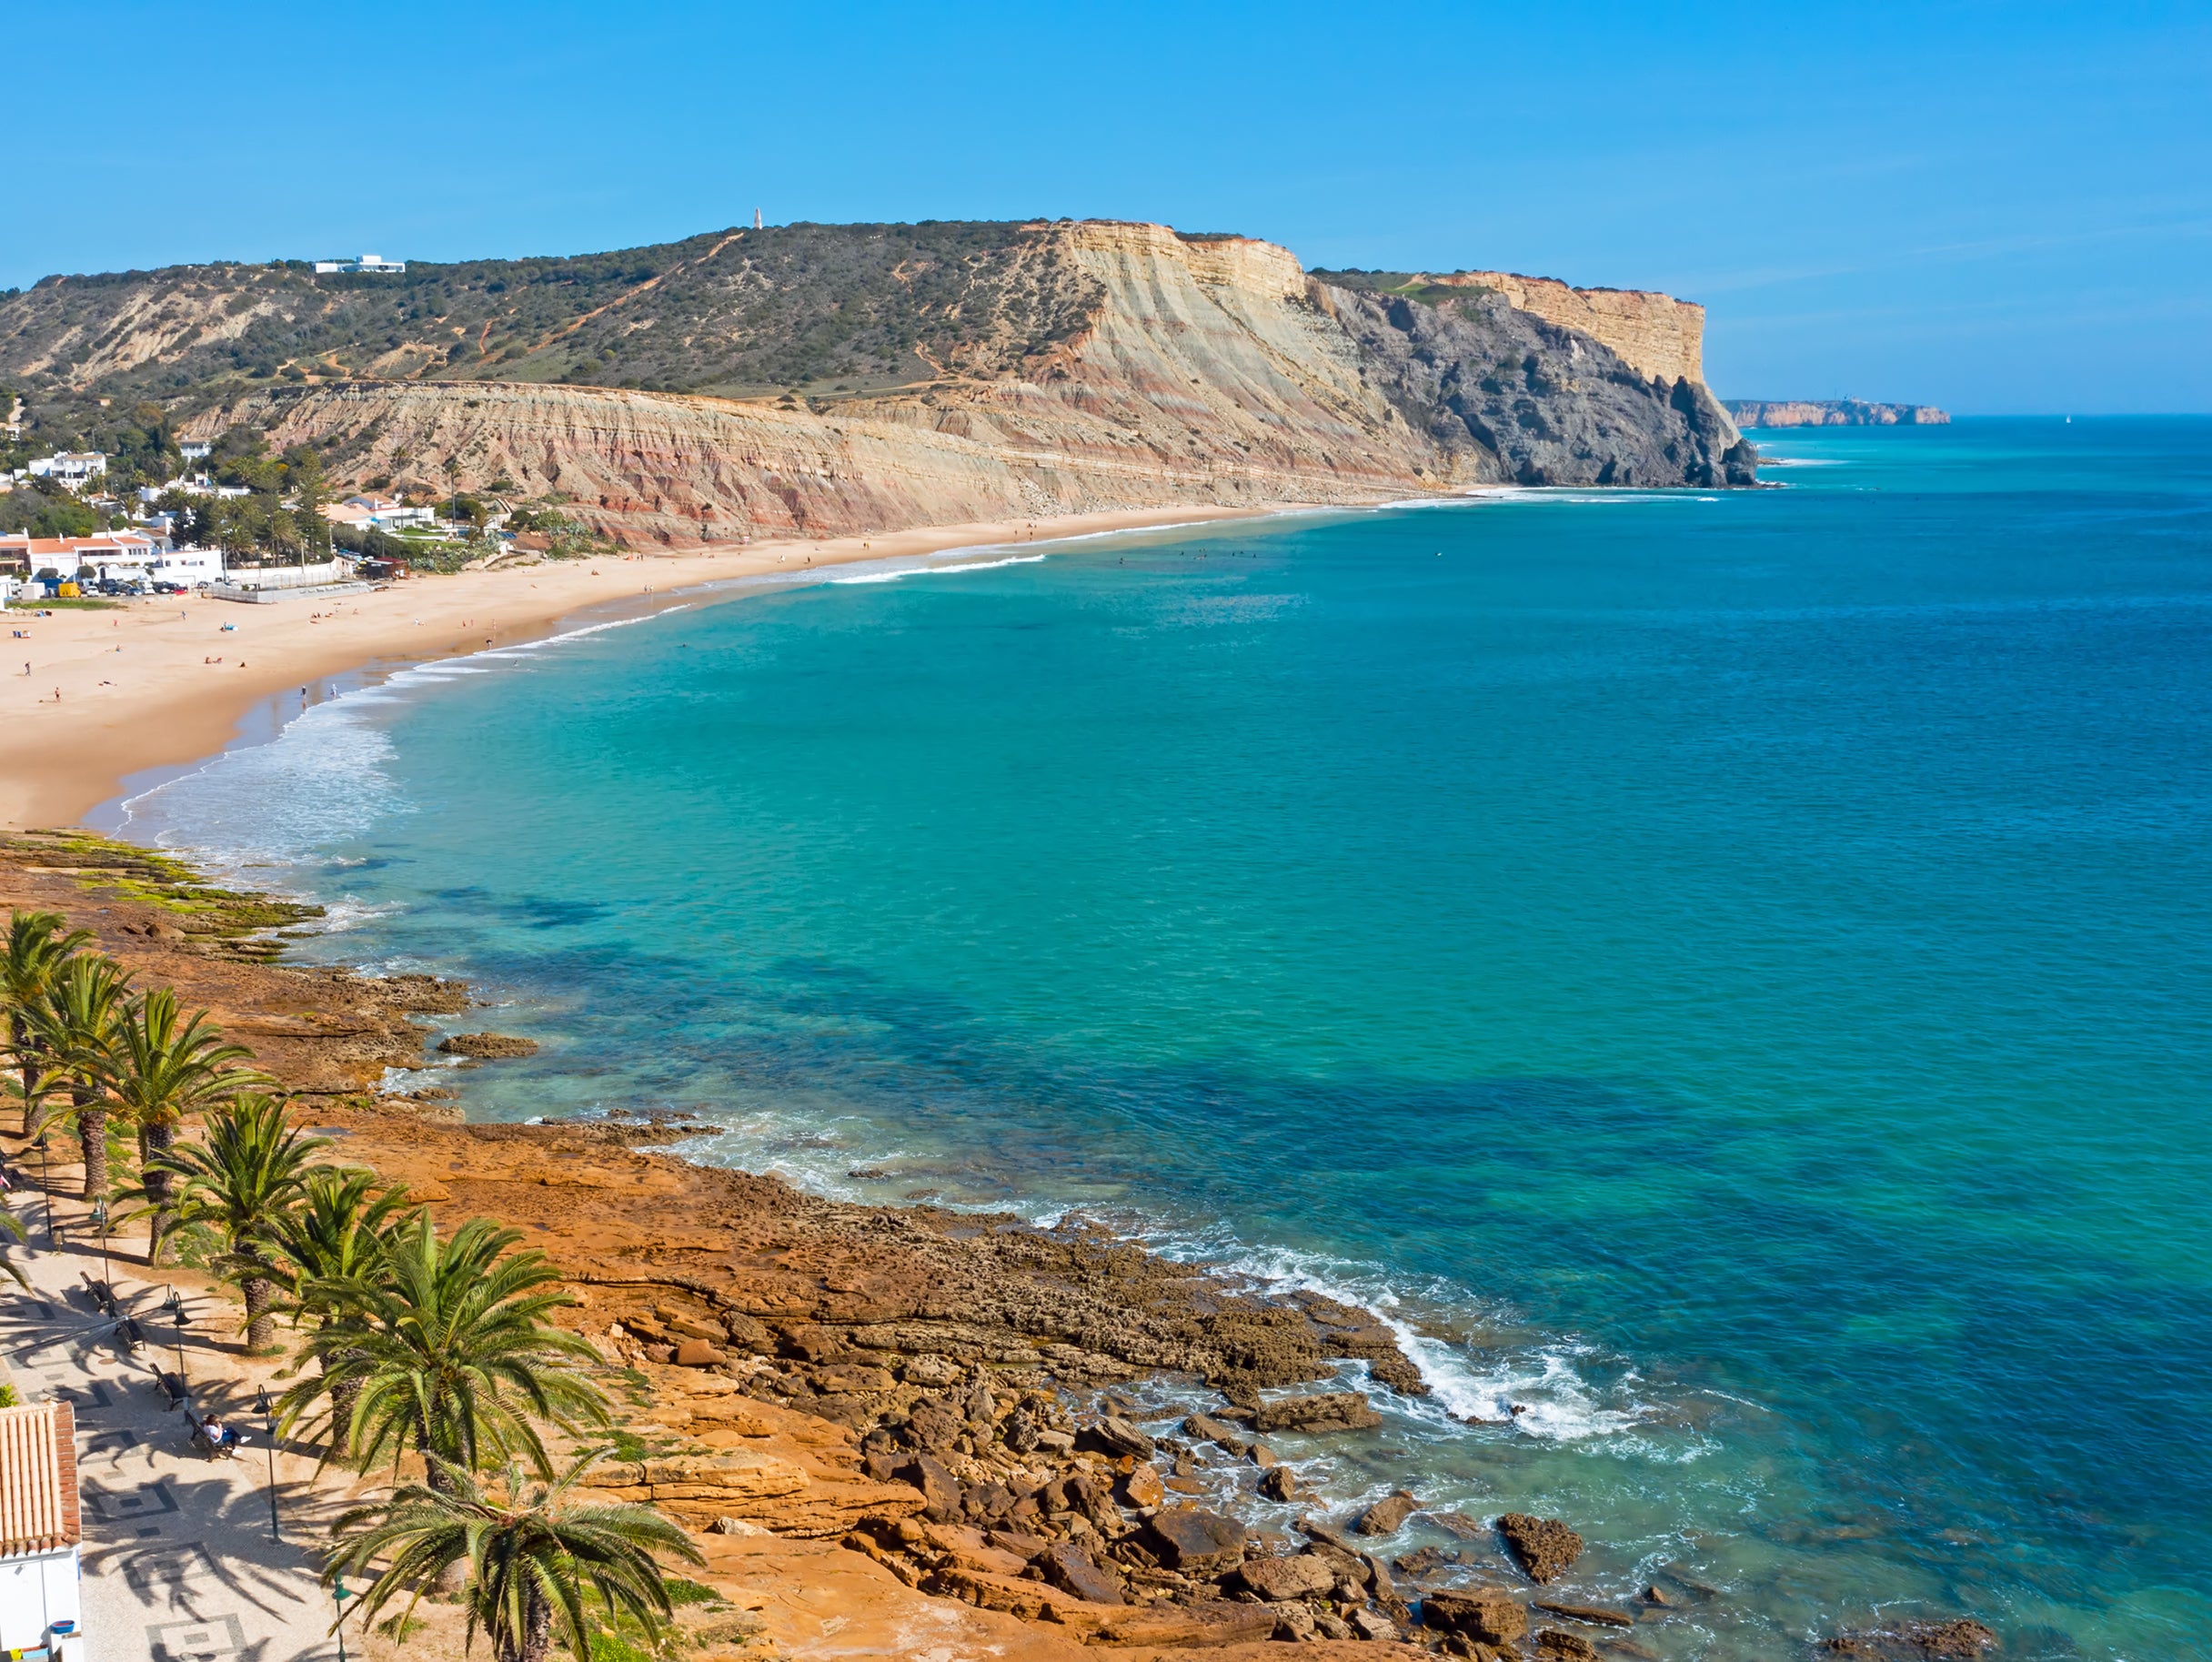 You could stay close to Praia da Luz, Portugal, this summer